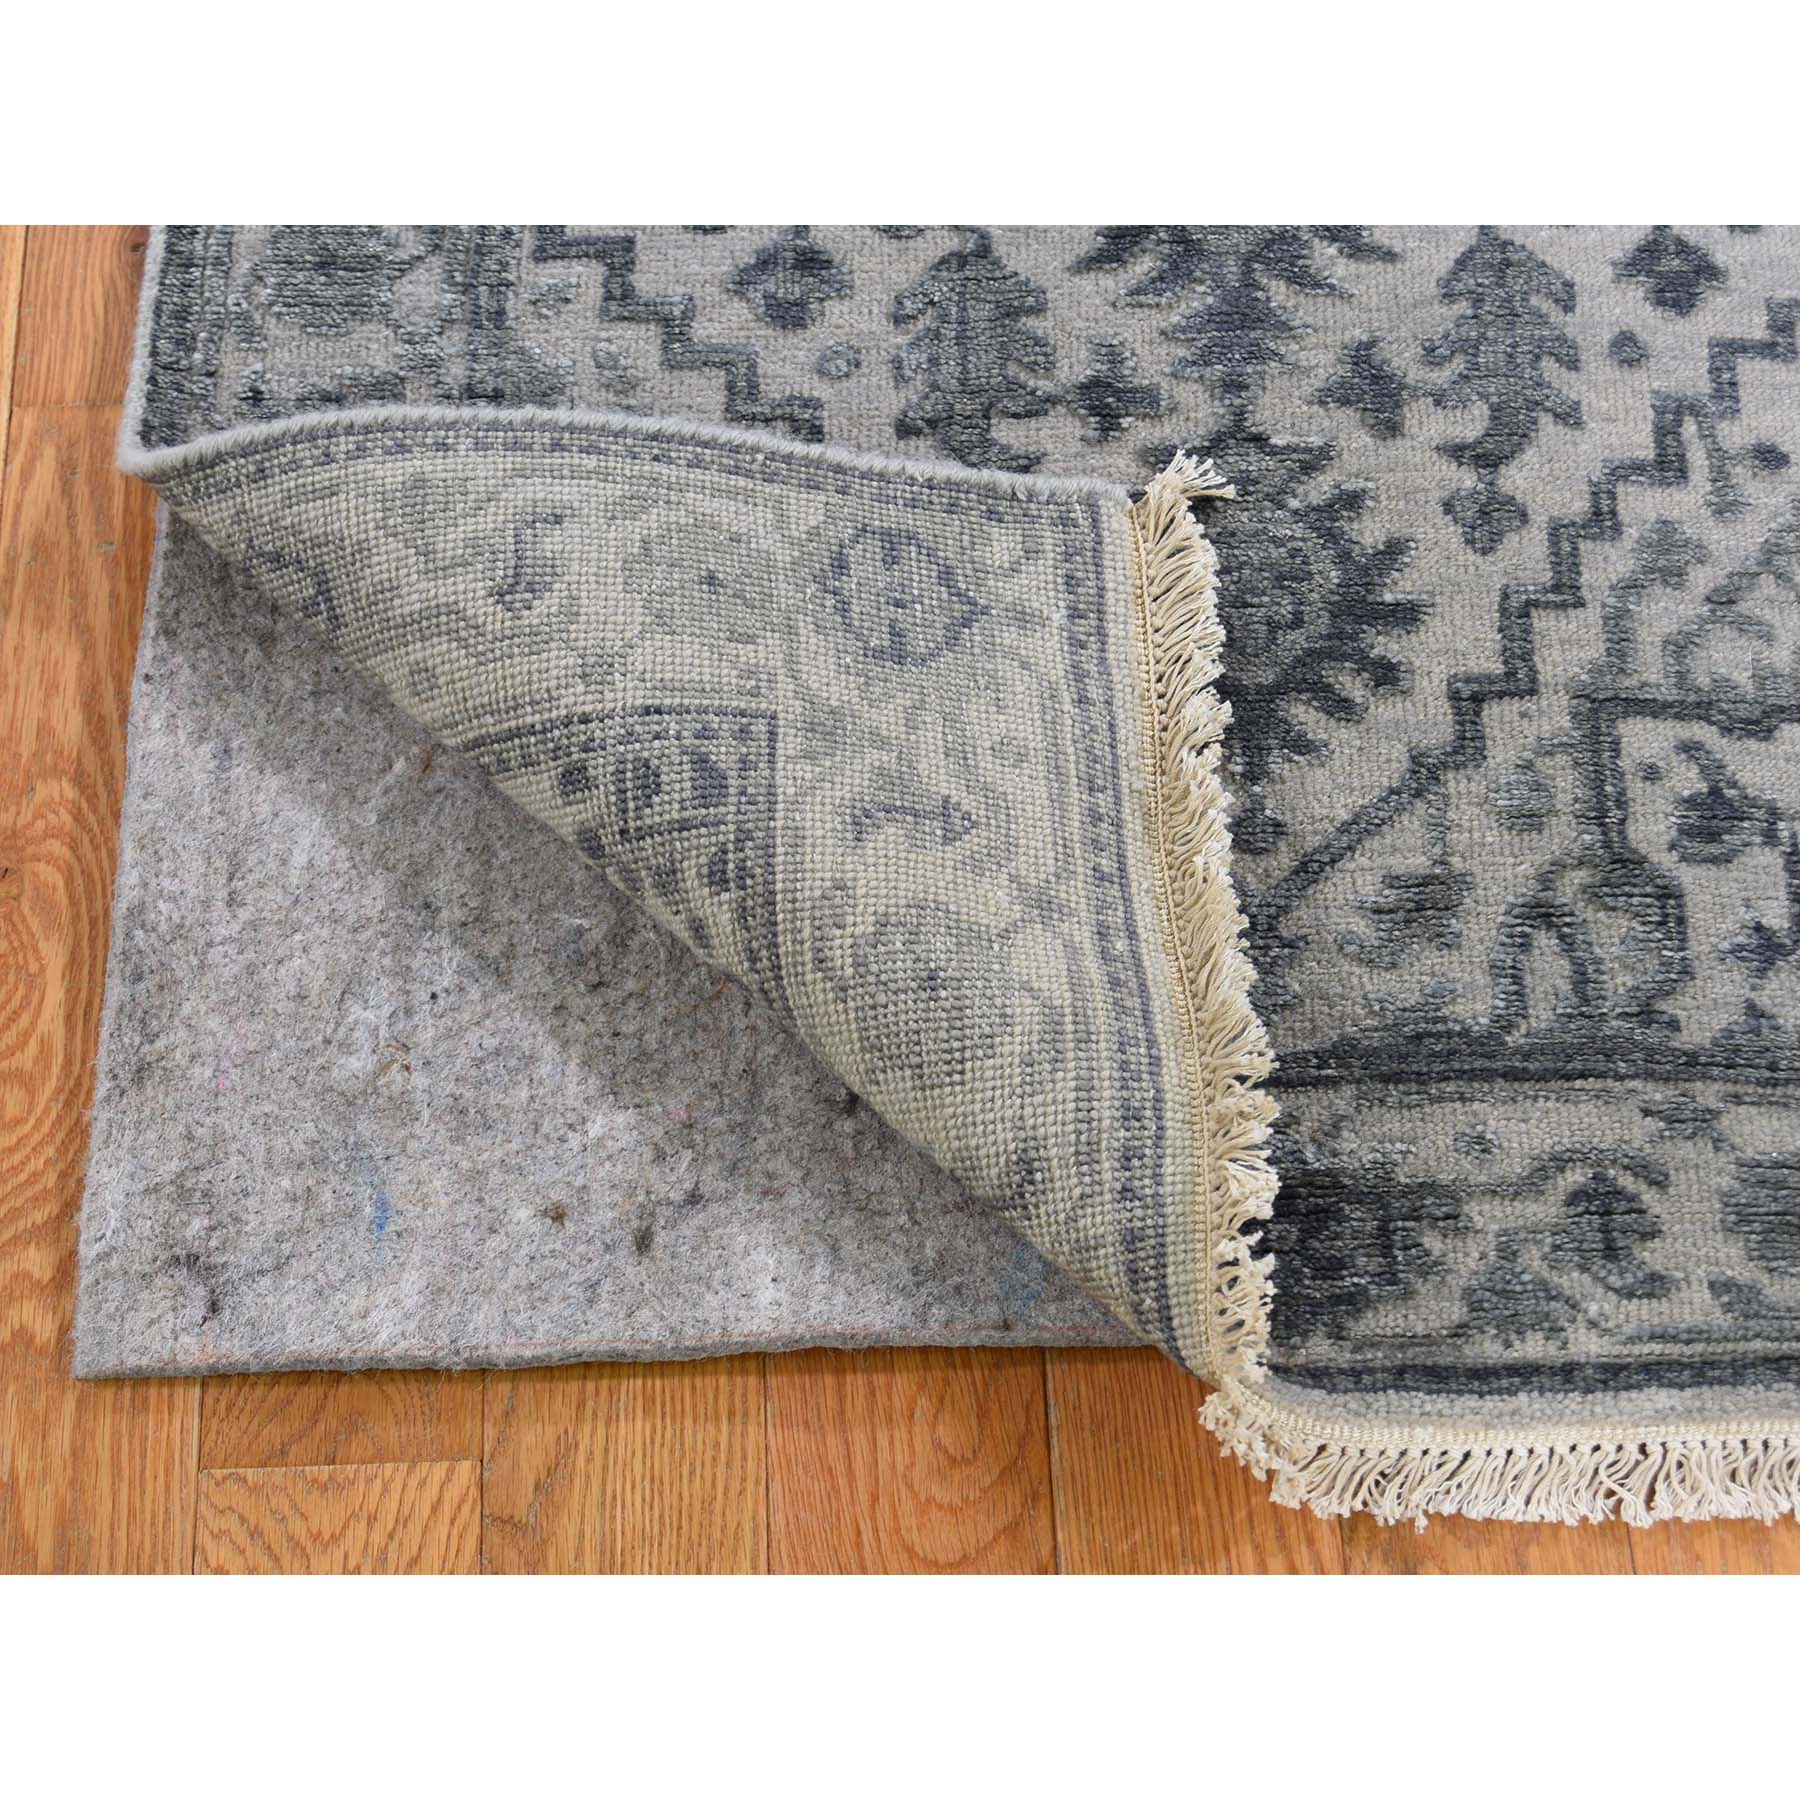 2-6 x6- Silver Heriz Design Wool And Silk Hi-lo Pile Short Runner Hand-Knotted Oriental Rug 